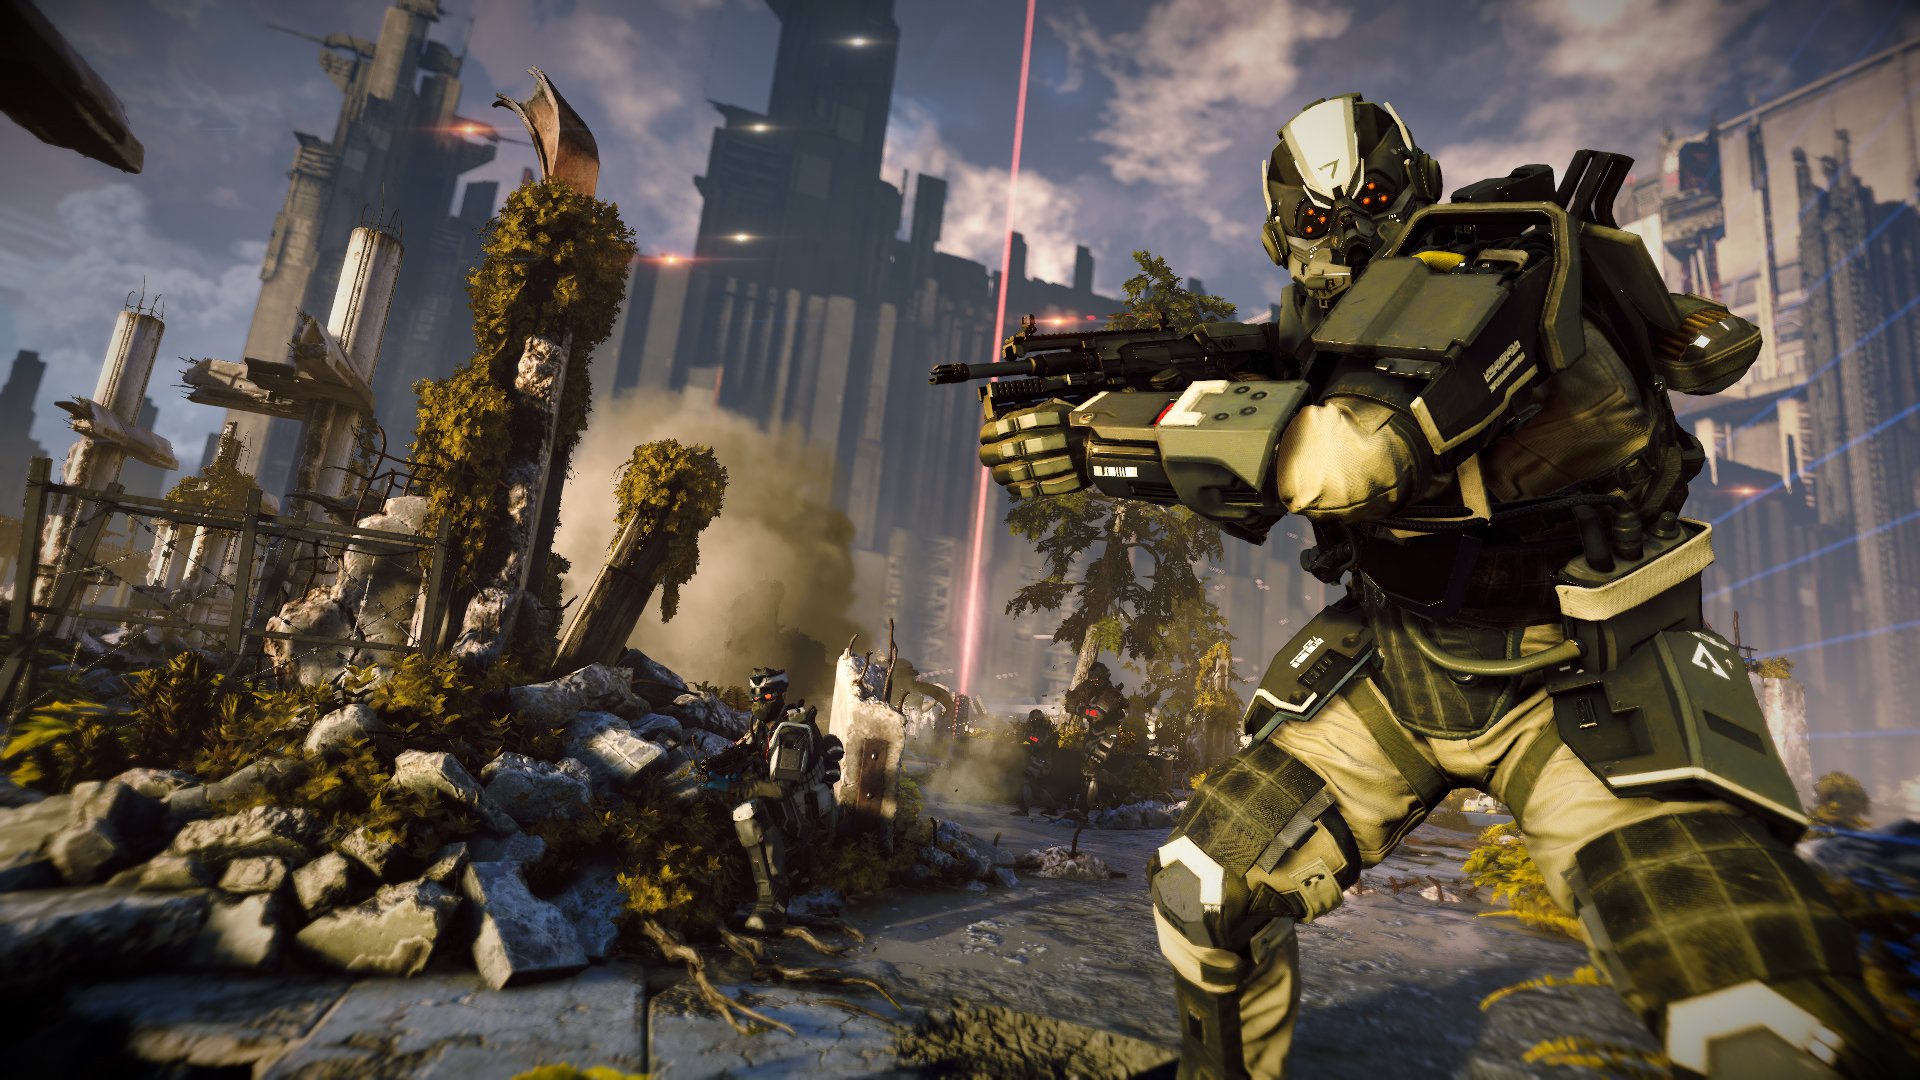 Download Now Killzone Shadow Fall Patch 1 30 To Get Bug Fixes And Images, Photos, Reviews